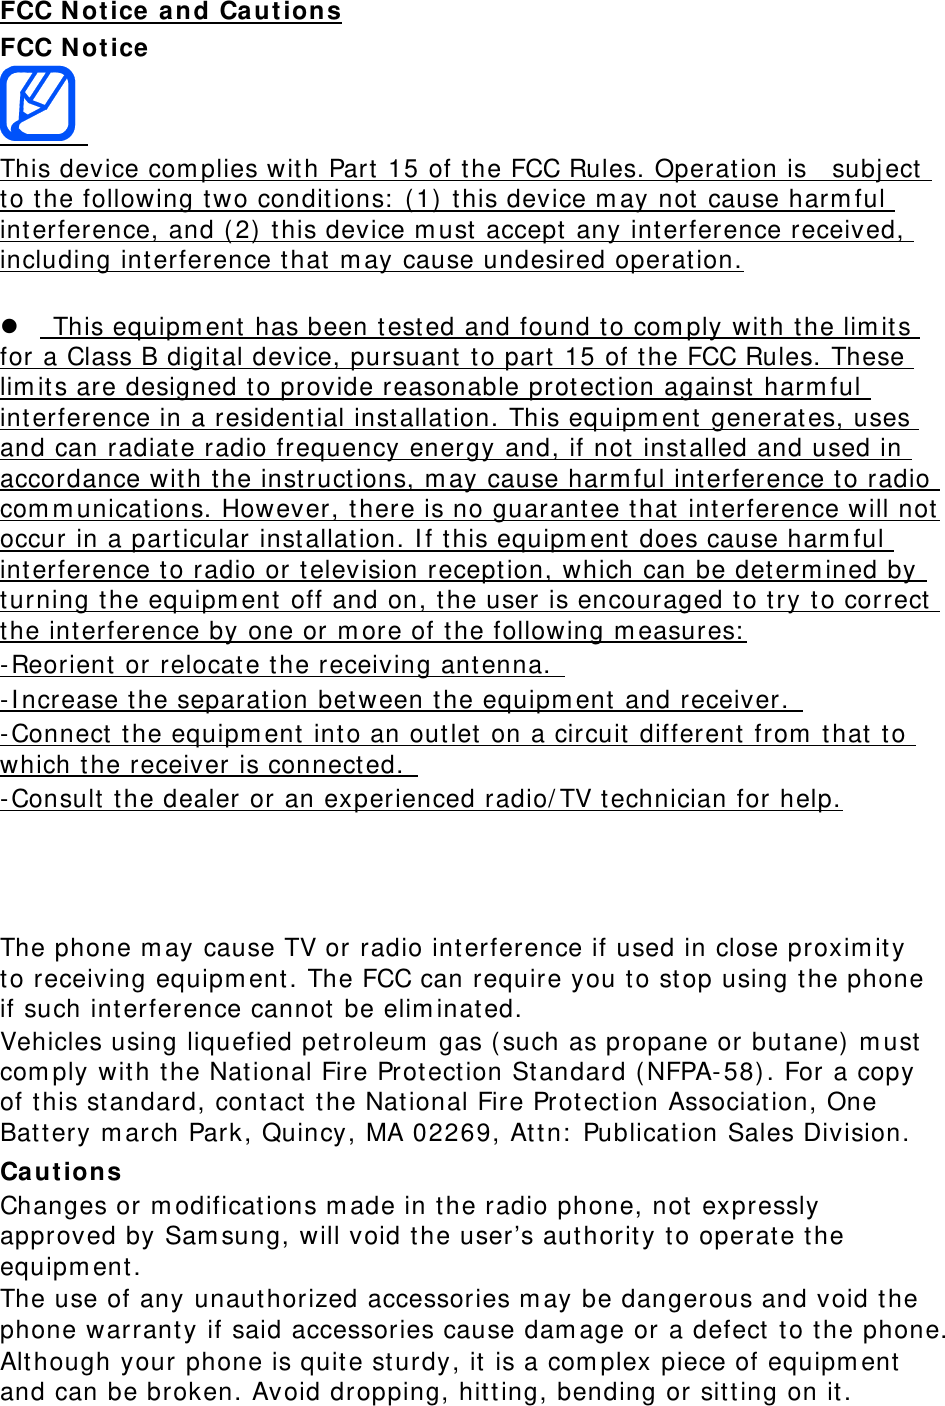 FCC N ot ice and Ca ut ions FCC N ot ice    This device com plies with Part  15 of t he FCC Rules. Operat ion is    subj ect  to the following t wo conditions:  ( 1)  t his device m ay not cause harm ful interference, and ( 2)  t his device m ust accept  any int erference received, including interference t hat m ay cause undesired operation.          This equipm ent  has been tested and found t o com ply wit h the lim it s for a Class B digit al device, pursuant  t o part 15 of t he FCC Rules. These lim its are designed t o provide reasonable prot ection against  harm ful interference in a resident ial installation. This equipm ent  generates, uses and can radiate radio frequency energy and, if not installed and used in accordance with t he instruct ions, m ay cause harm ful int erference to radio com m unicat ions. However, t here is no guarantee that int erference will not occur in a part icular installation. I f t his equipm ent  does cause harm ful interference to radio or television reception, which can be det erm ined by turning t he equipm ent  off and on, t he user is encouraged to try t o correct  the int erference by one or m ore of t he following m easures:  - Reorient  or relocate t he receiving ant enna.   - I ncrease t he separation between t he equipm ent  and receiver.   - Connect t he equipm ent  into an outlet on a circuit different from  t hat to which t he receiver is connect ed.   - Consult  t he dealer or an experienced radio/ TV technician for help.    The phone m ay cause TV or radio int erference if used in close proxim it y to receiving equipm ent . The FCC can require you to stop using the phone if such int erference cannot be elim inated. Vehicles using liquefied pet roleum  gas ( such as propane or but ane)  m ust  com ply wit h the Nat ional Fire Protection St andard ( NFPA- 58) . For a copy of t his standard, cont act  t he Nat ional Fire Protection Association, One Battery m arch Park, Quincy, MA 02269, At t n:  Publication Sales Division. Ca ut ion s Changes or m odificat ions m ade in t he radio phone, not  expressly approved by Sam sung, will void the user’s authority to operate t he equipm ent. The use of any unaut horized accessories m ay be dangerous and void t he phone warrant y if said accessories cause dam age or a defect  t o the phone. Alt hough your phone is quite sturdy, it is a com plex piece of equipm ent  and can be broken. Avoid dropping, hitting, bending or sitt ing on it . 